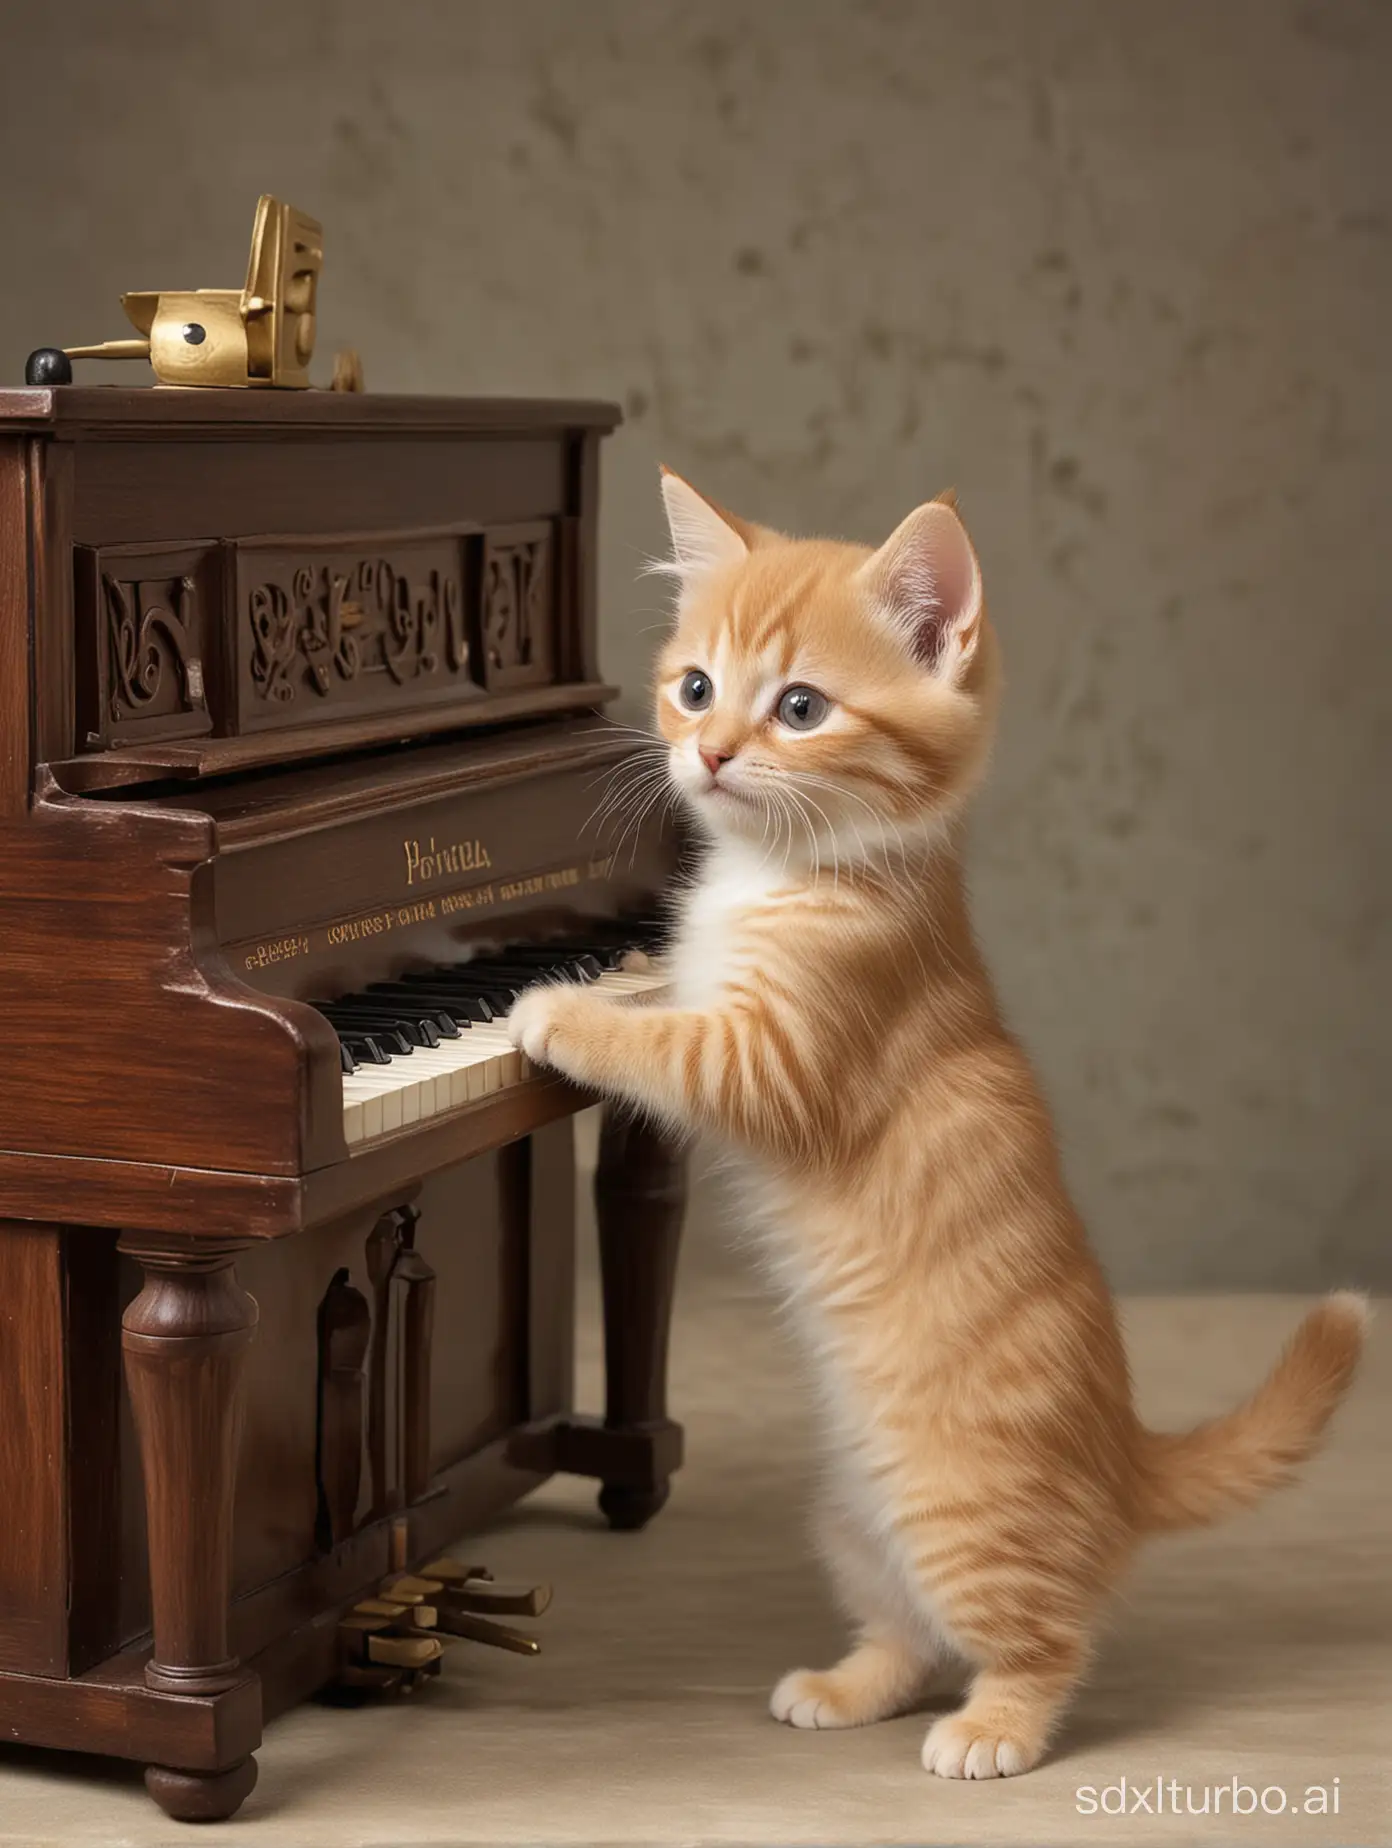 Cute-Anthropomorphic-Kitten-Playing-Piano-Adorable-Feline-Musical-Performance